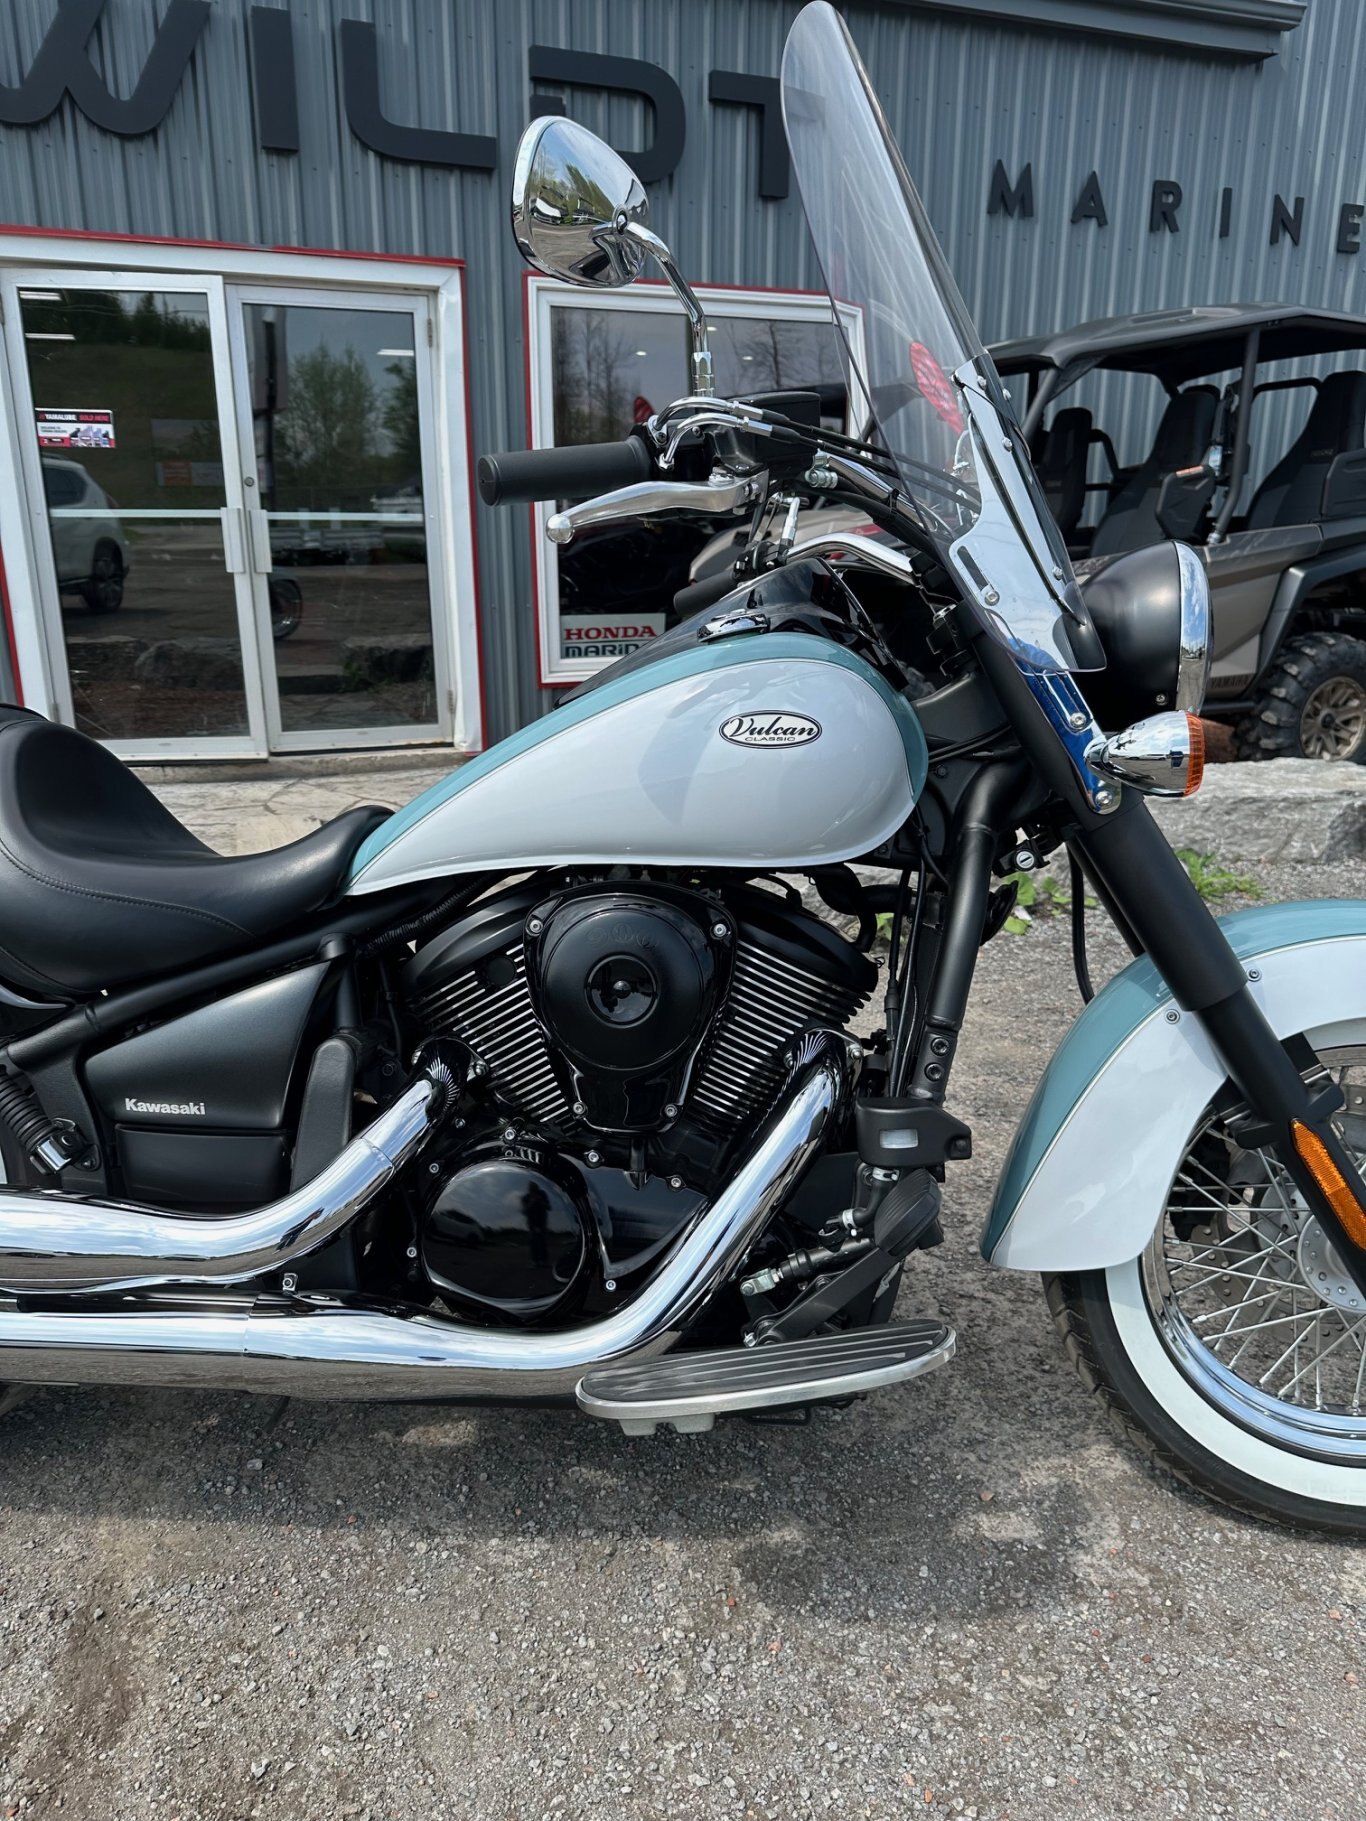 2020 Kawasaki Vulcan 900 Classic - One  Owner & Well Maintained!